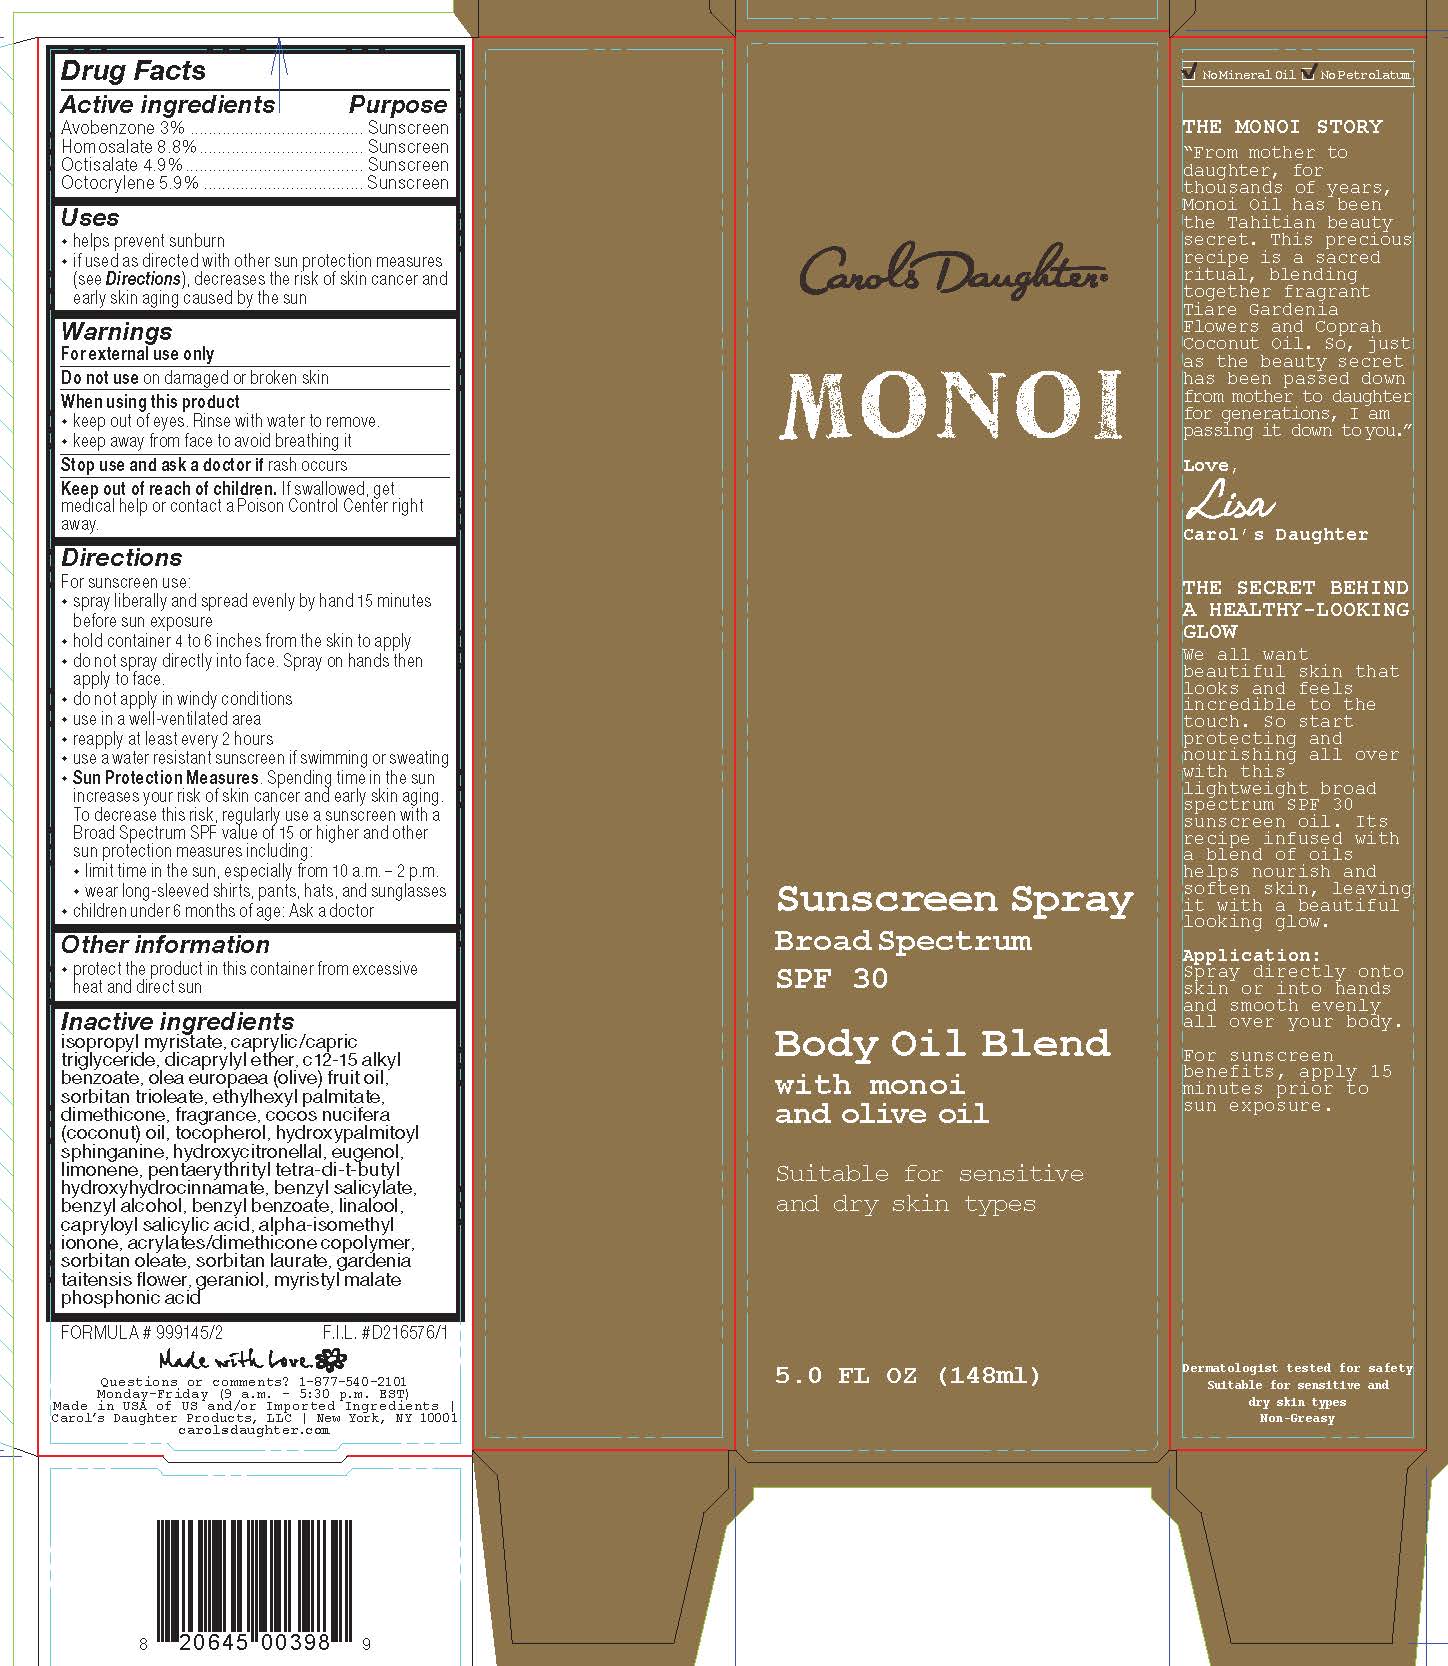 image of a label